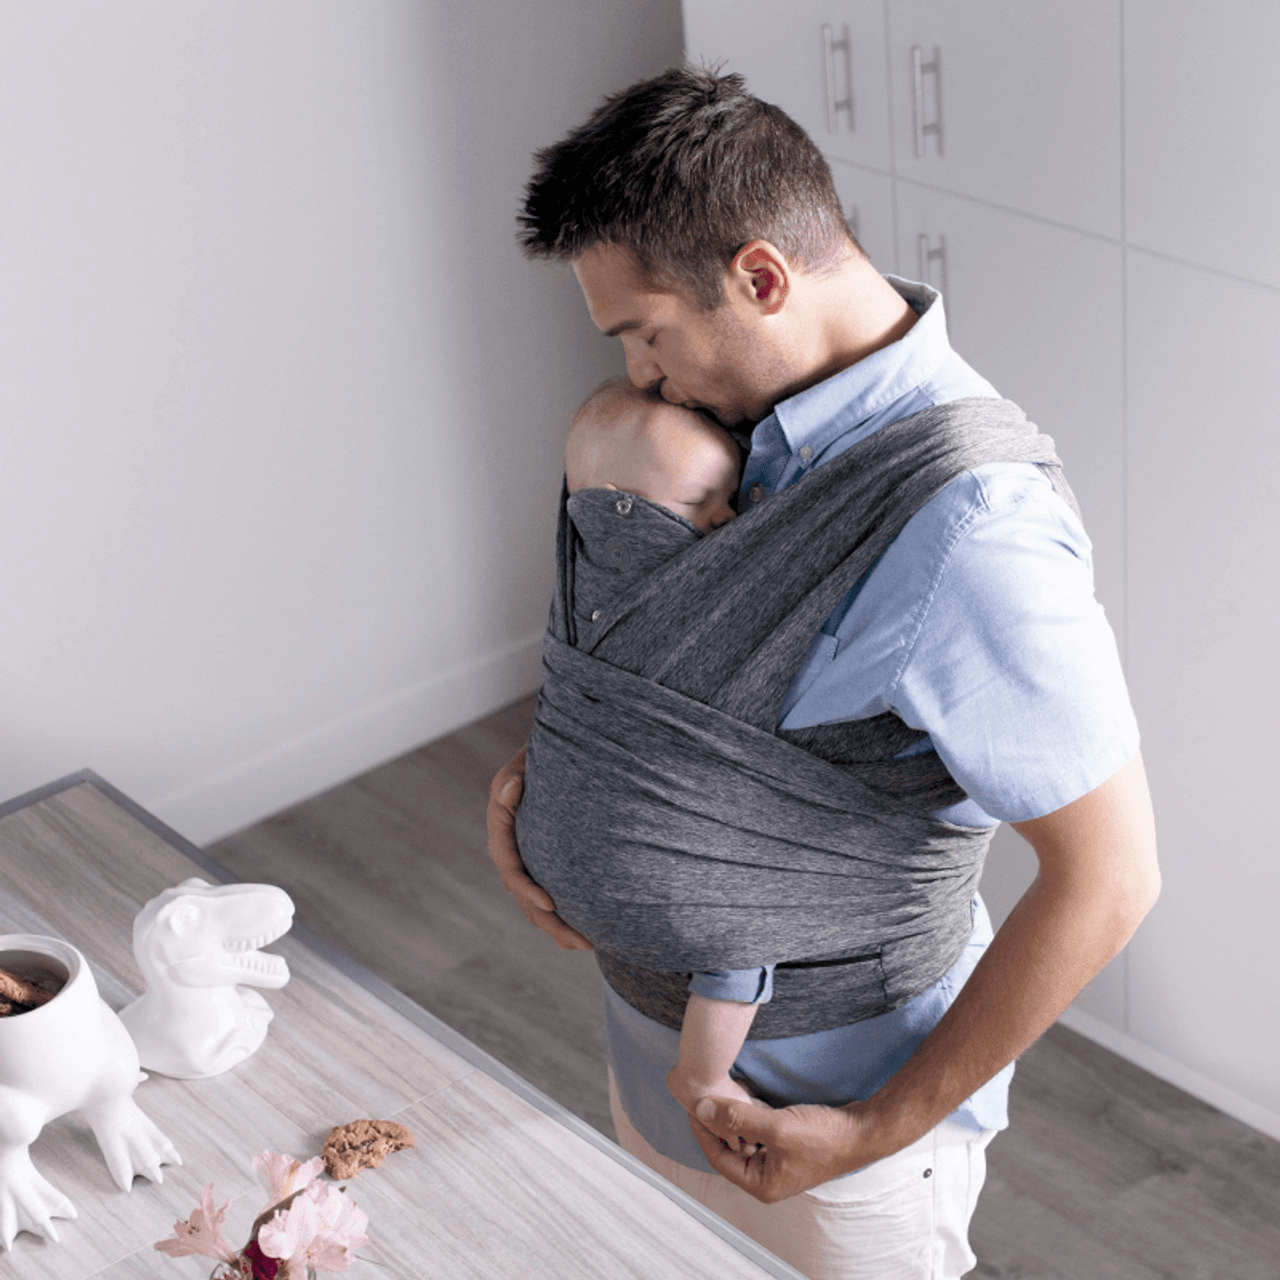 Chicco Comfyfit Baby Carrier by BOPPY